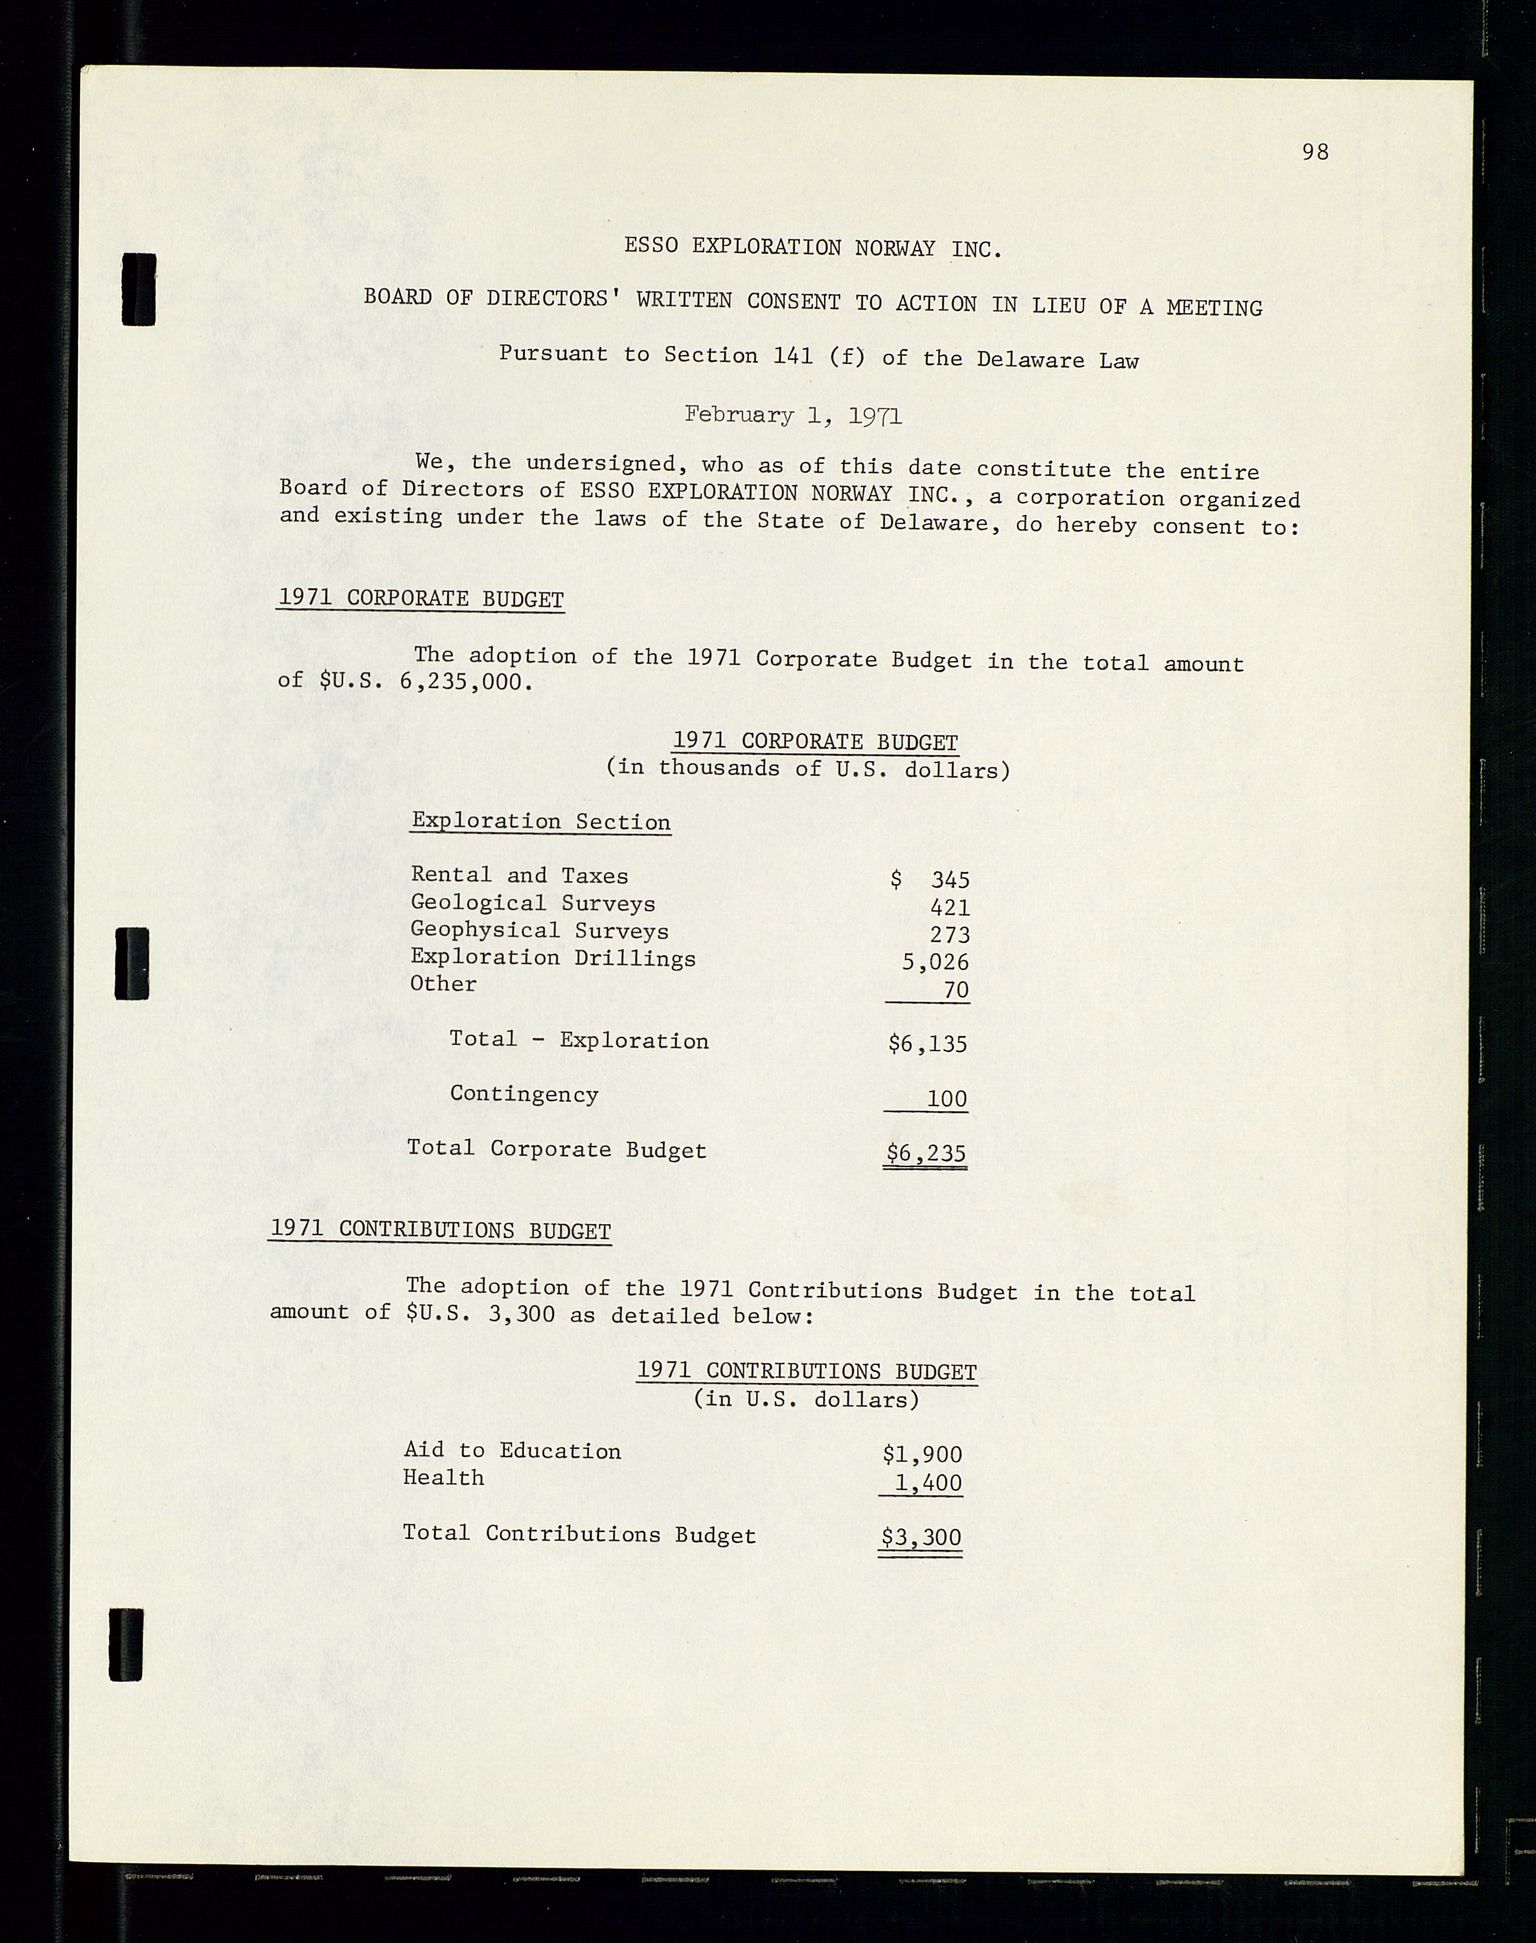 Pa 1512 - Esso Exploration and Production Norway Inc., SAST/A-101917/A/Aa/L0001/0001: Styredokumenter / Corporate records, By-Laws, Board meeting minutes, Incorporations, 1965-1975, s. 98